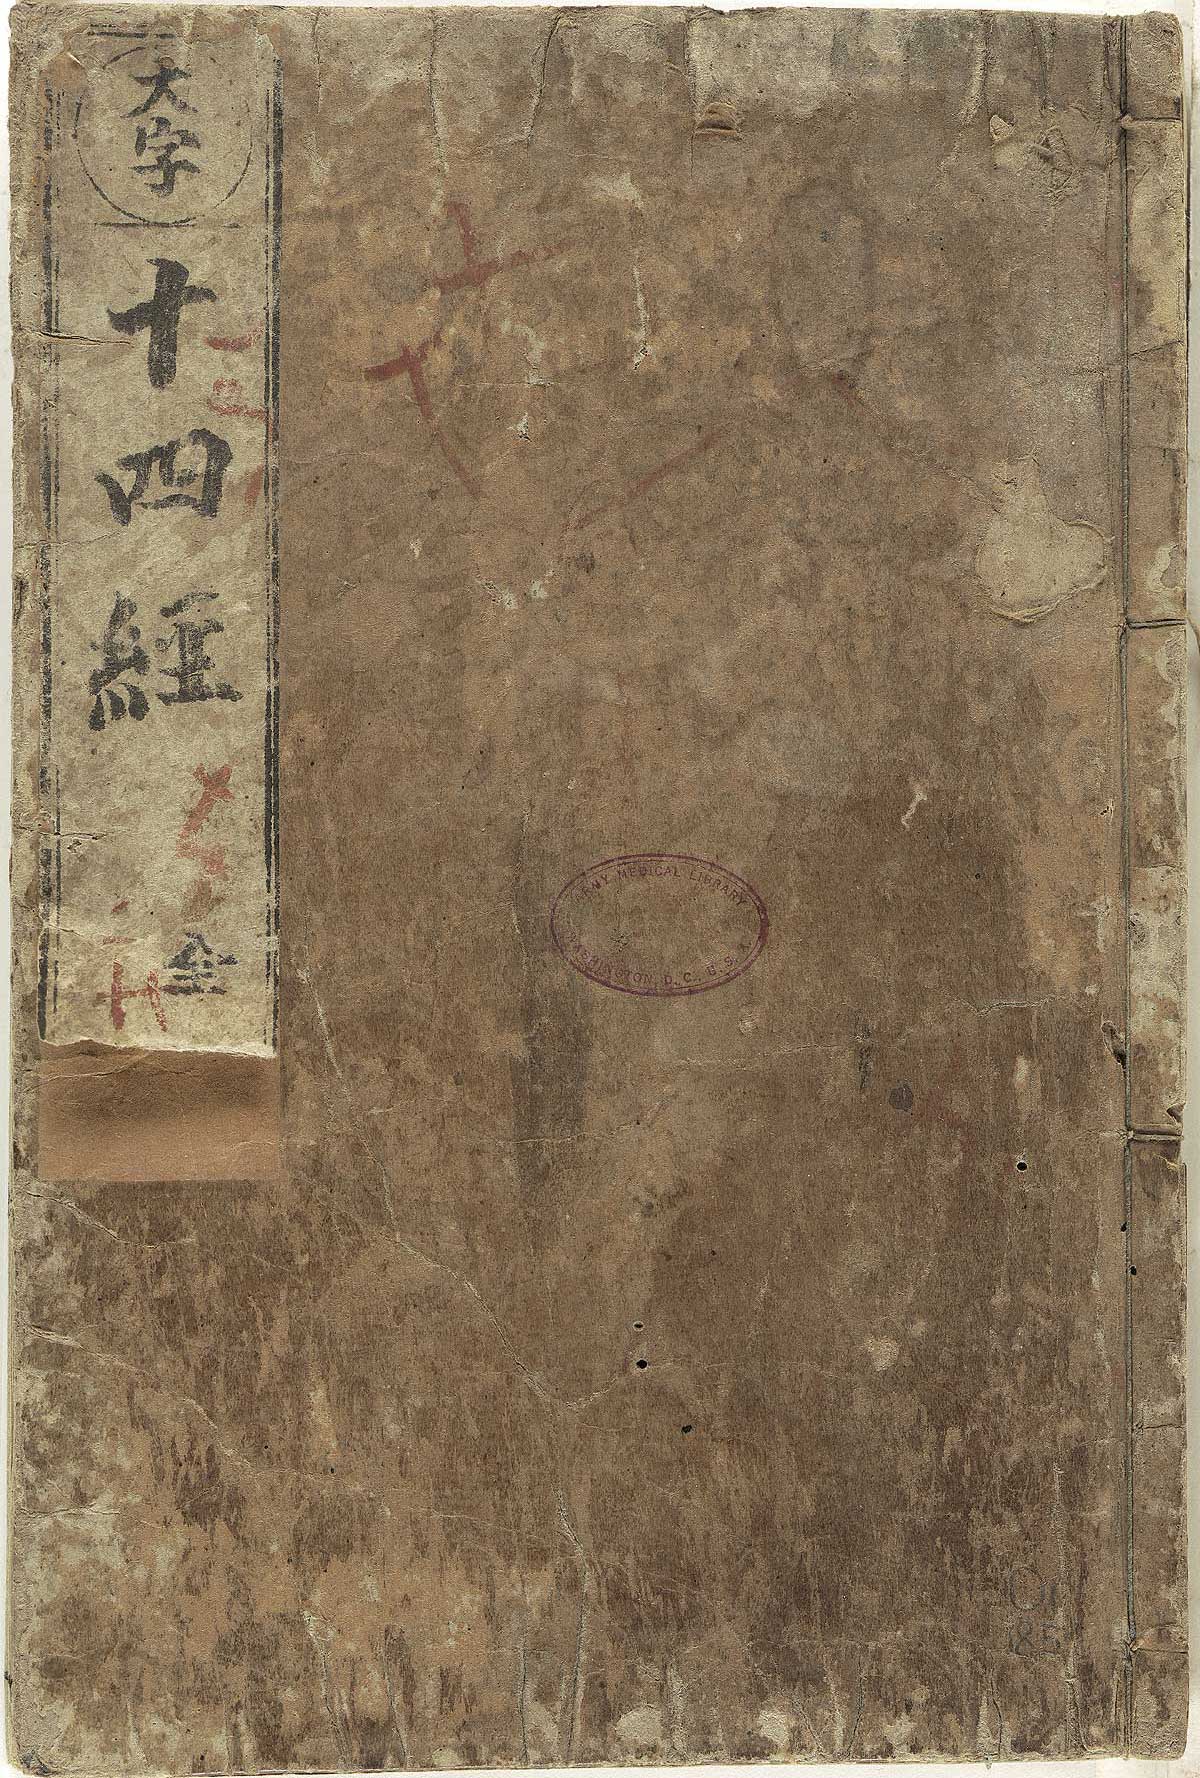 Cover of Hua Shou’s Jushikei hakki with a title piece in Chinese, NLM Call no.: WZ 260 H868s 1716.